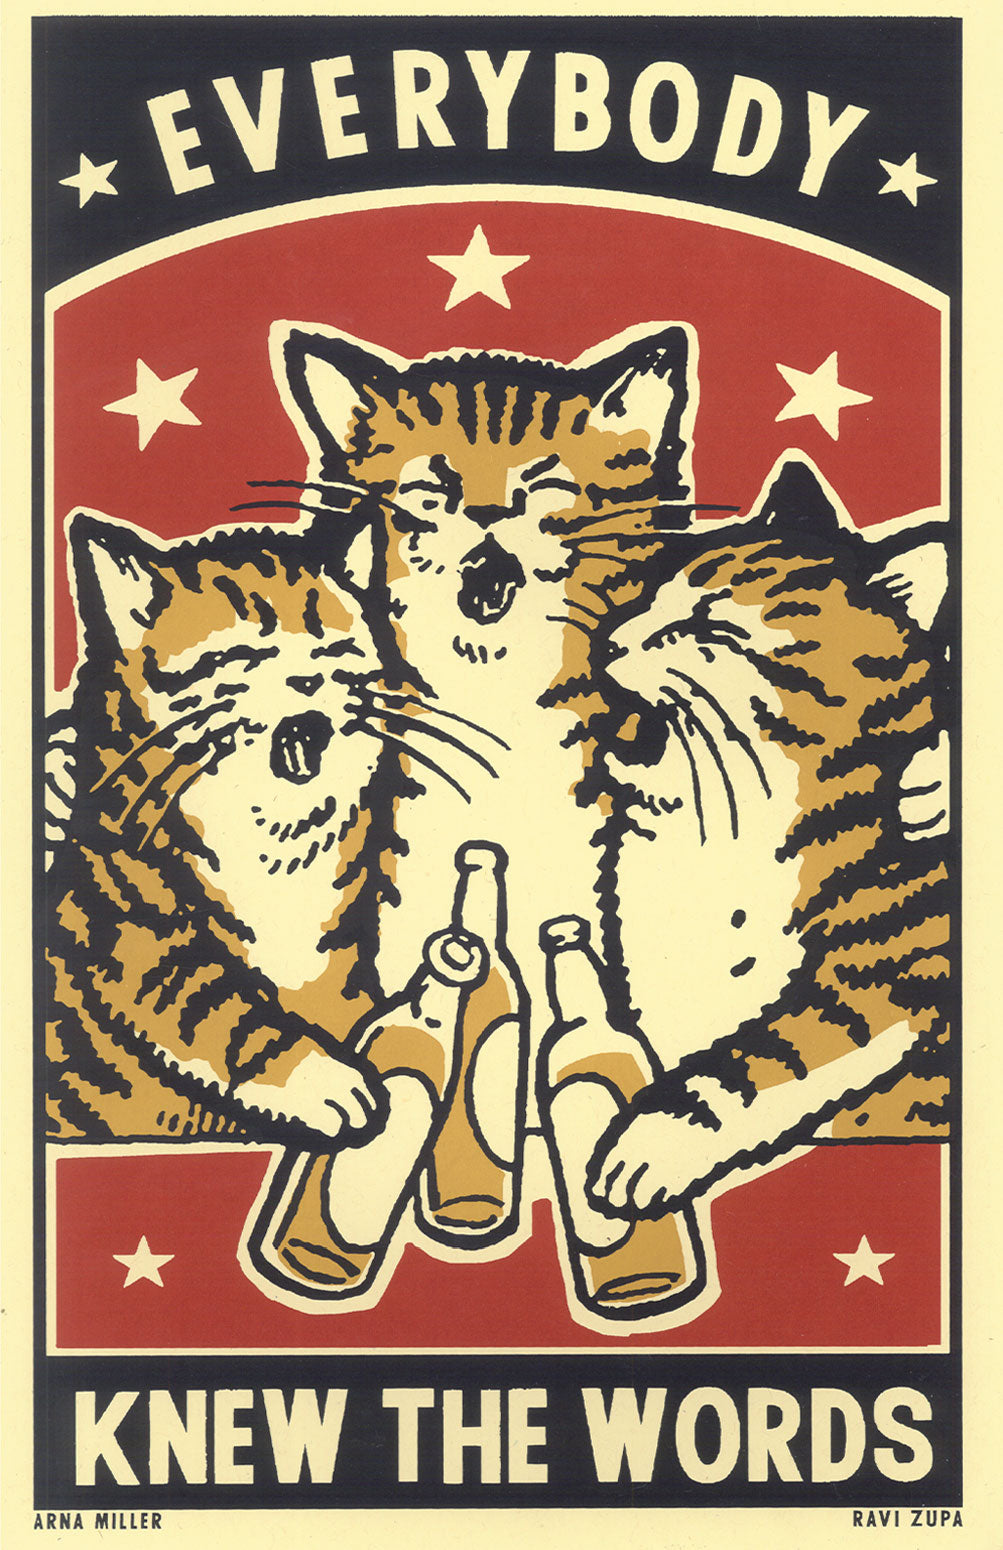 Drunk Cat Series Print - Everybody Knew The Words - By Arna Miller and Ravi Zupa